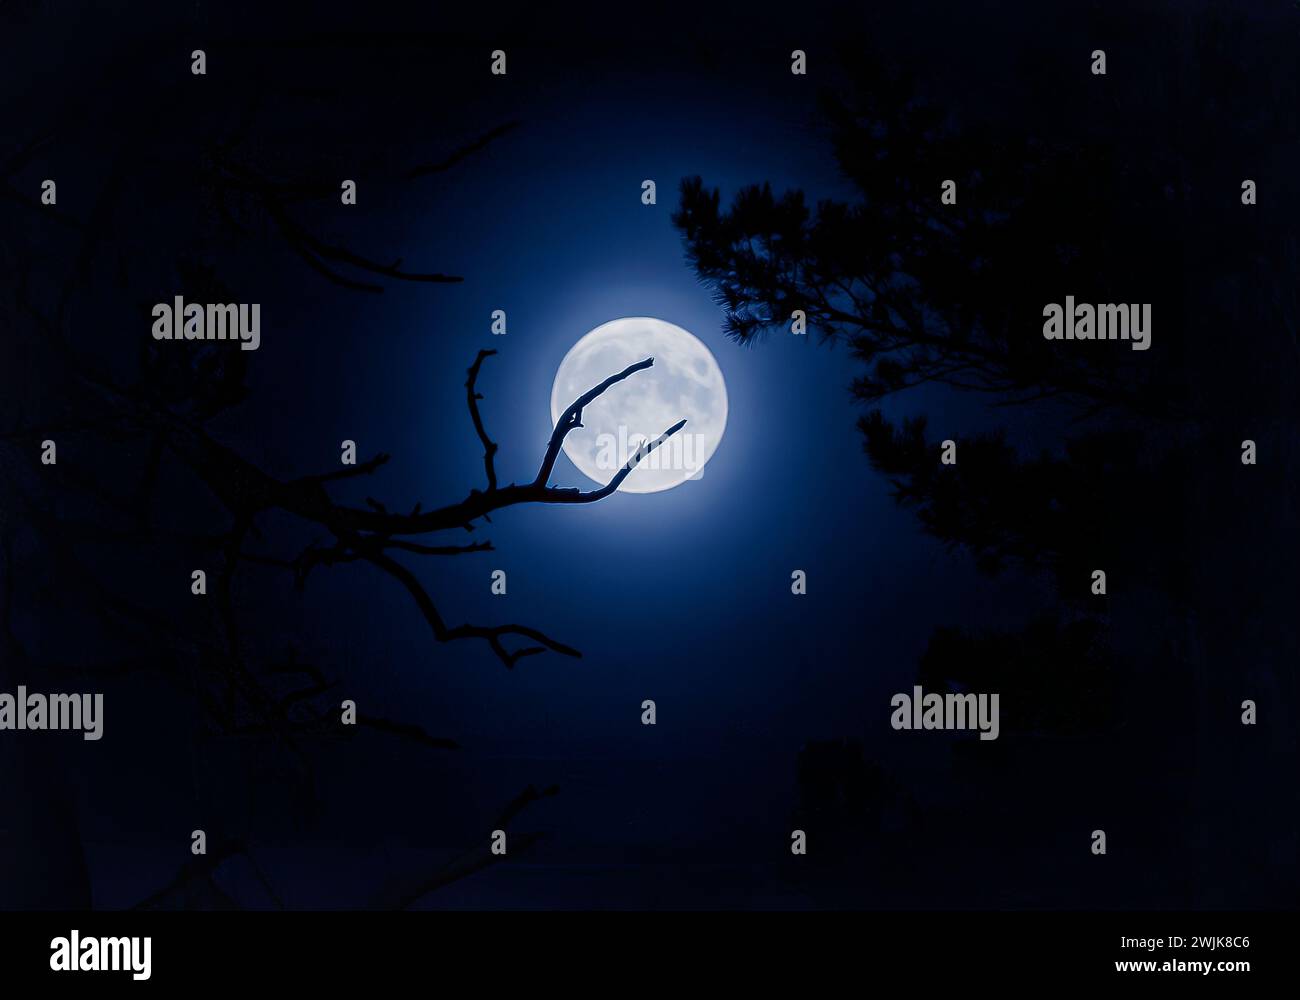 A serene full moon on a clear night, with tree branches silhouetted against its glow - evoking calmness. Stock Photo